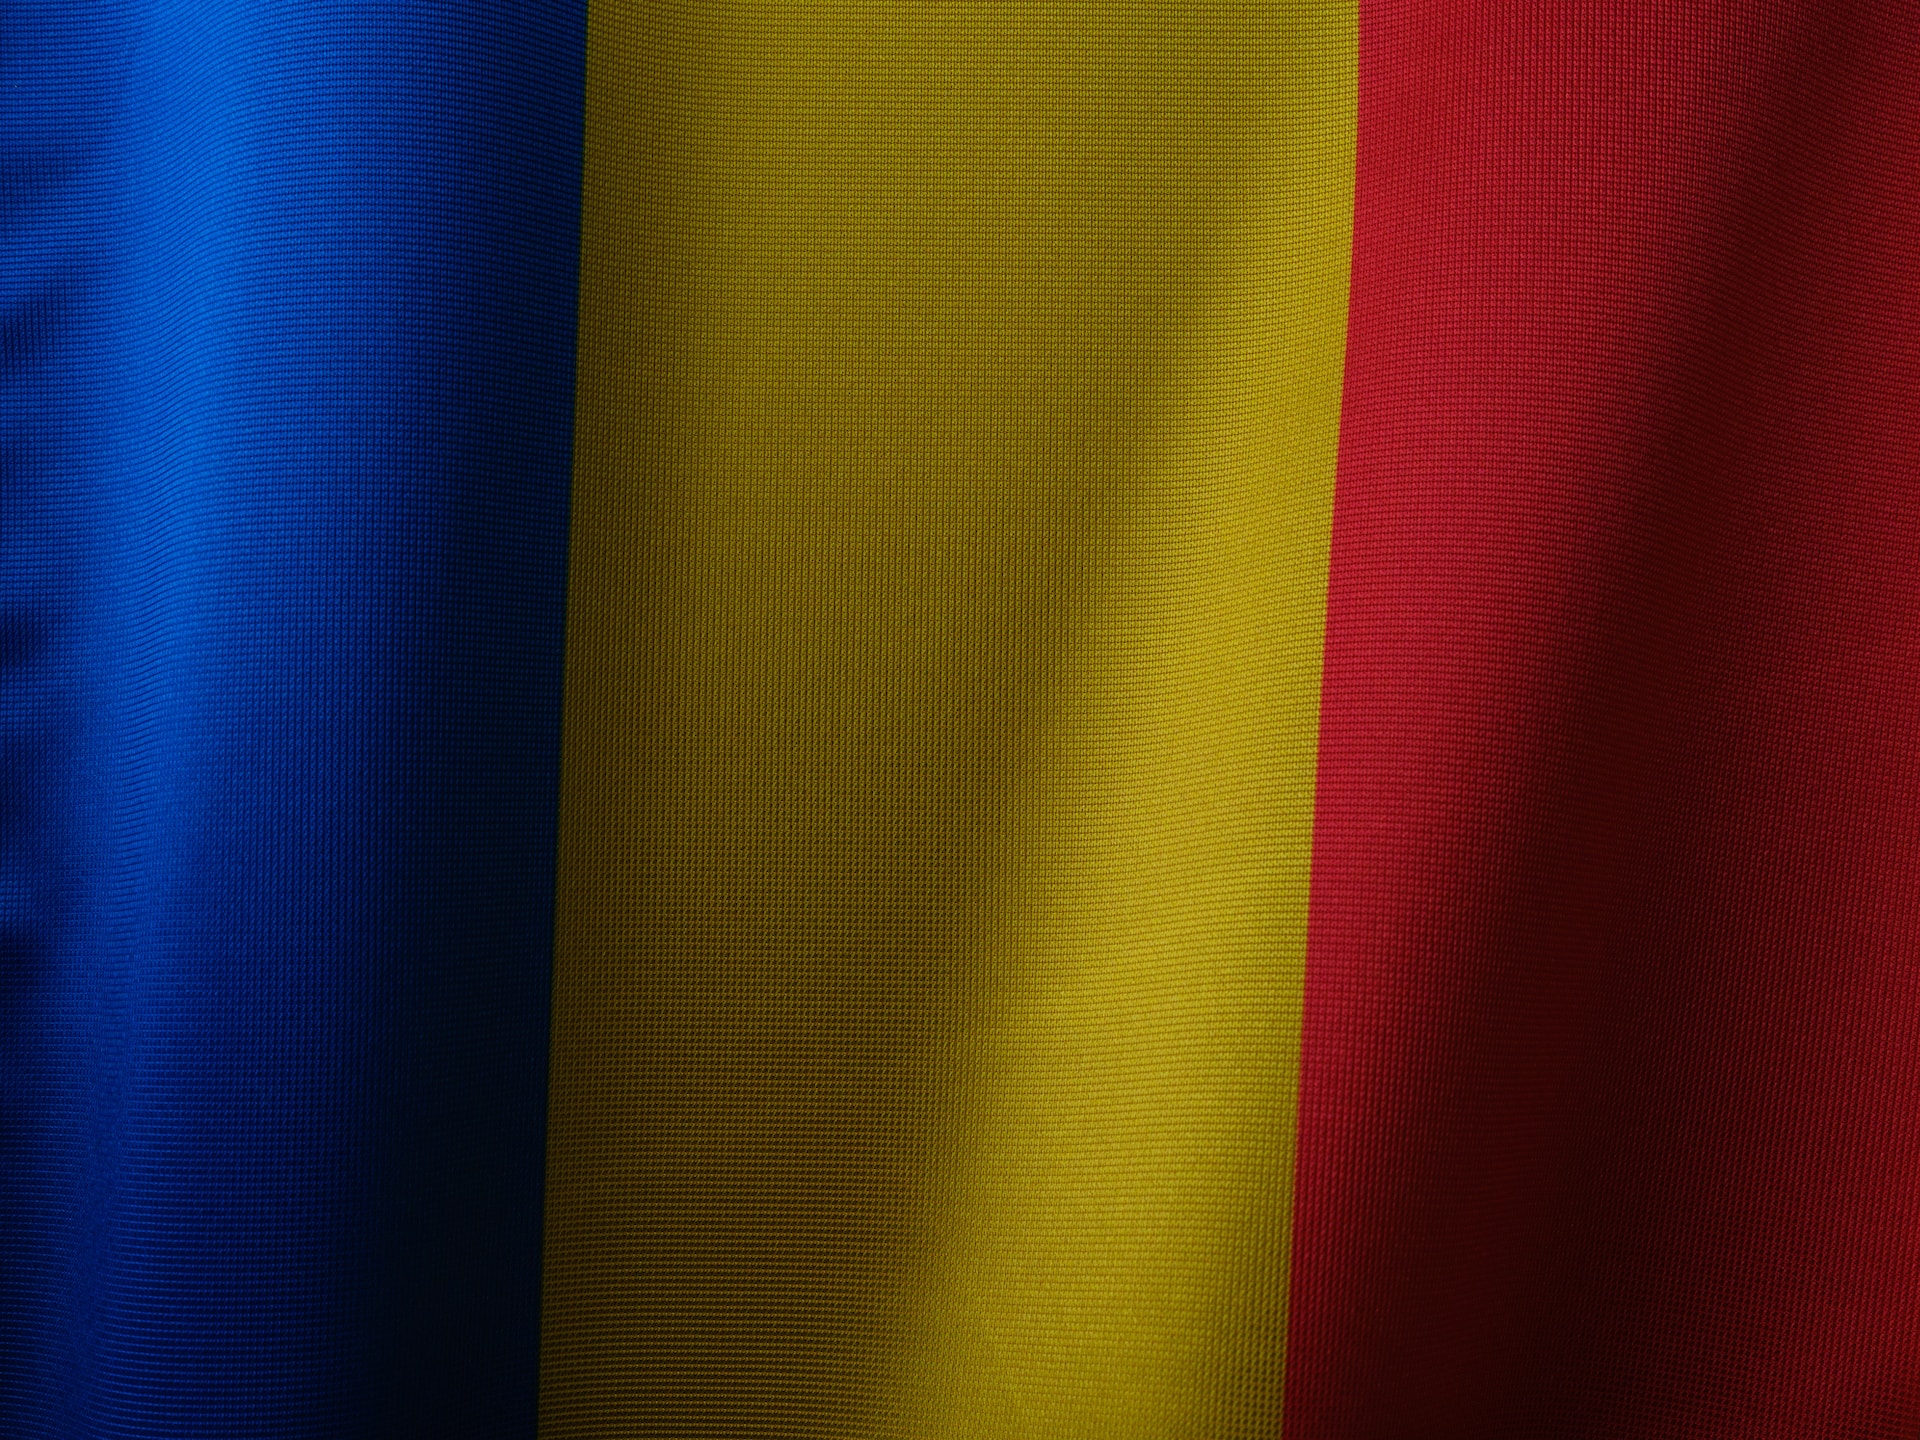 An Overview of the Romanian eCommerce Sector